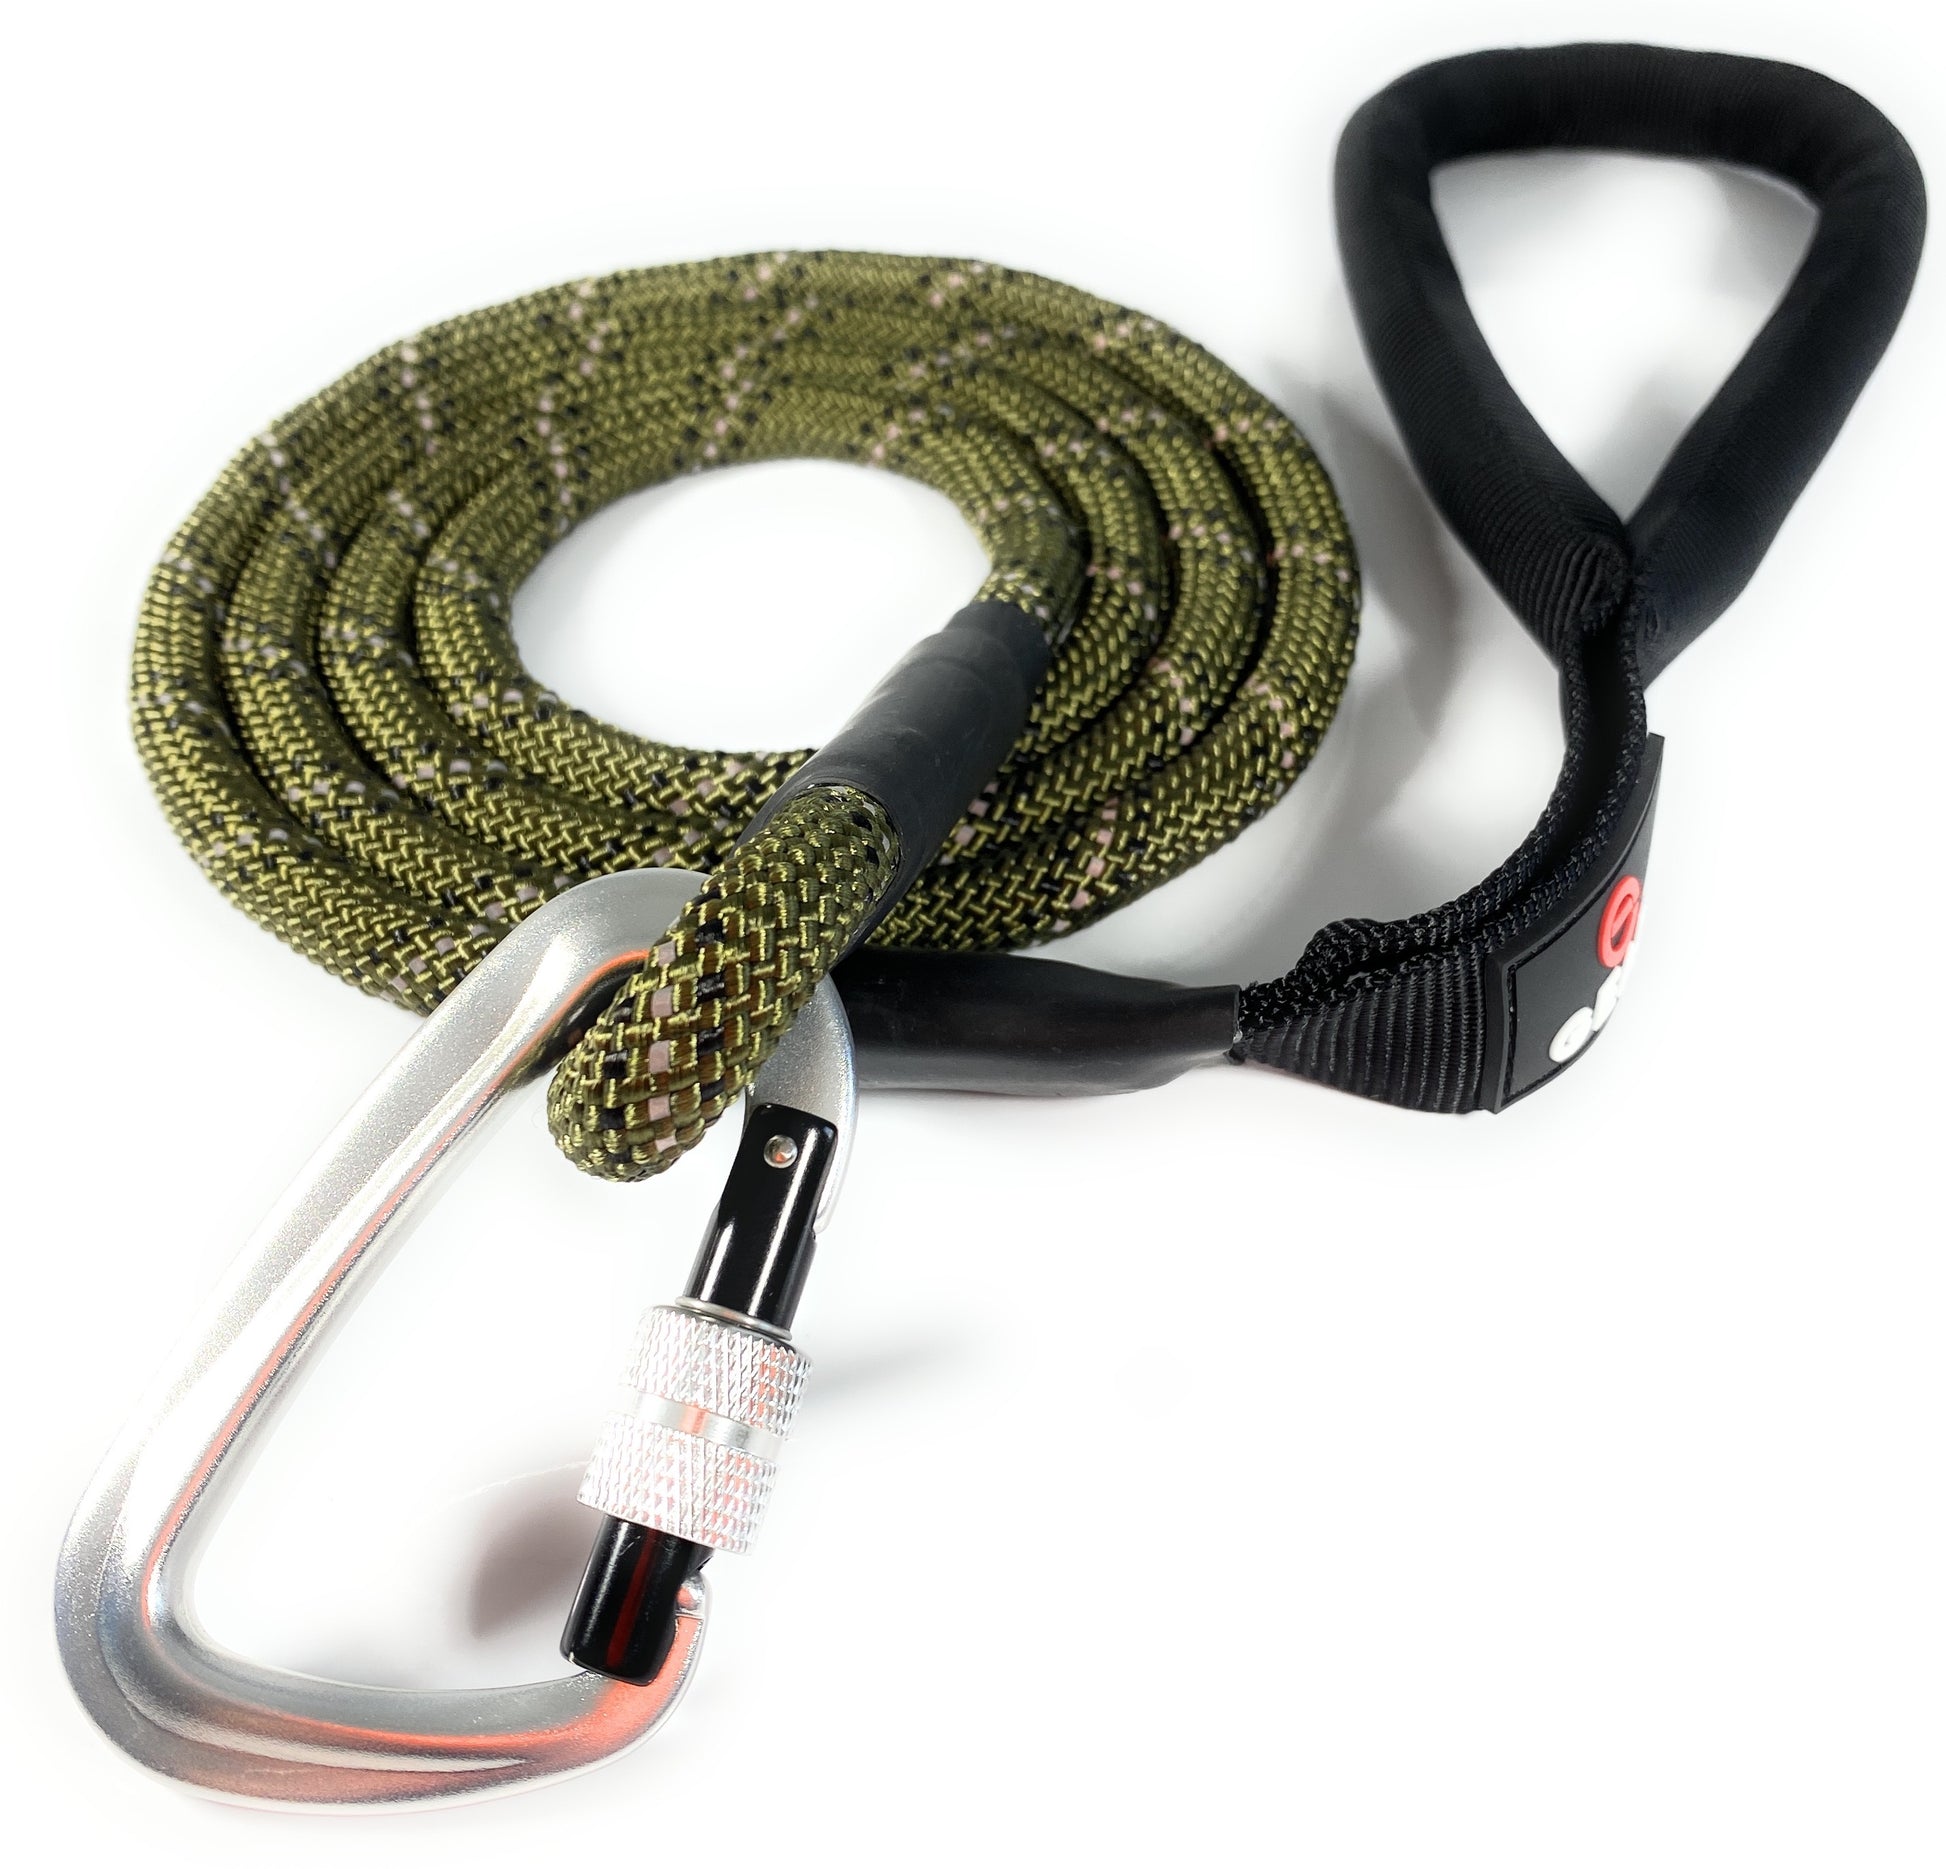 Climbing Rope Dog Leash with Locking Carabiner - Military Green